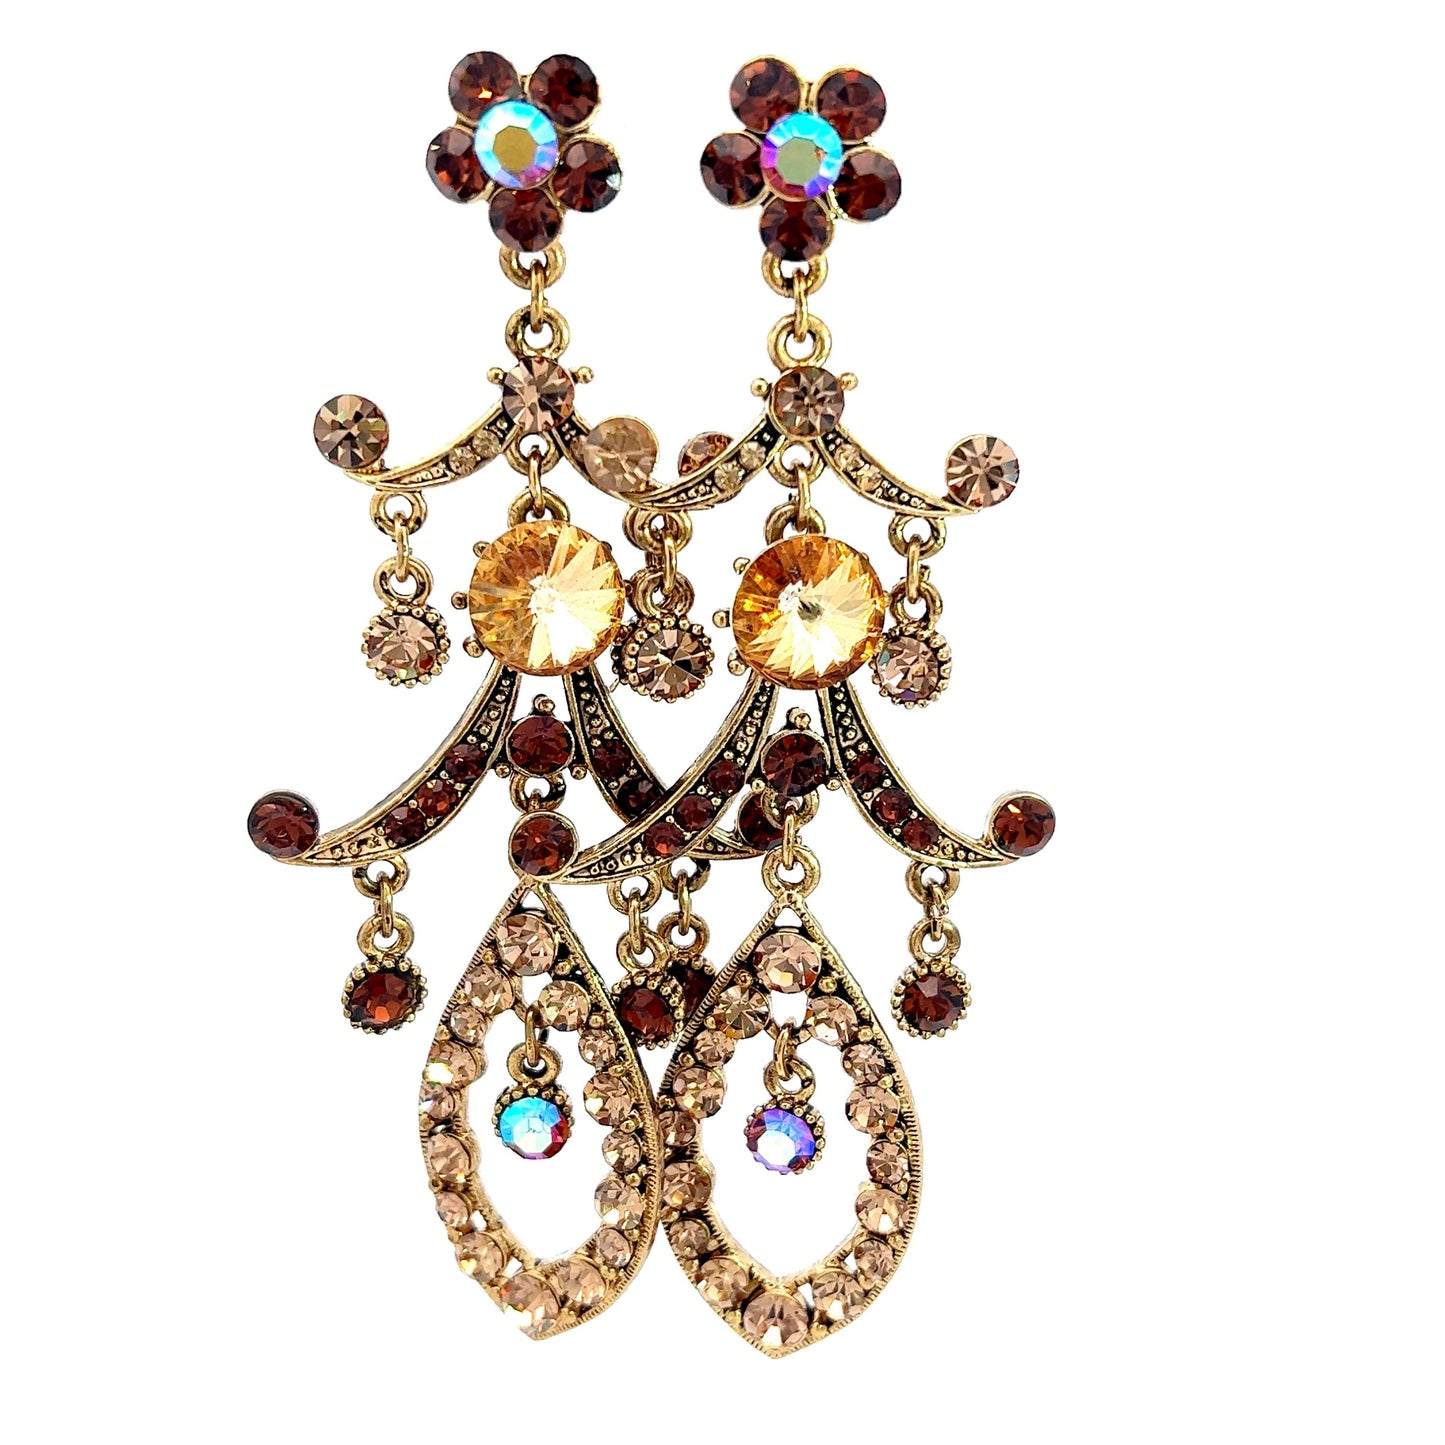 Gold Campagne 3 Tier Crystal Statement Earrings - Born To Glam